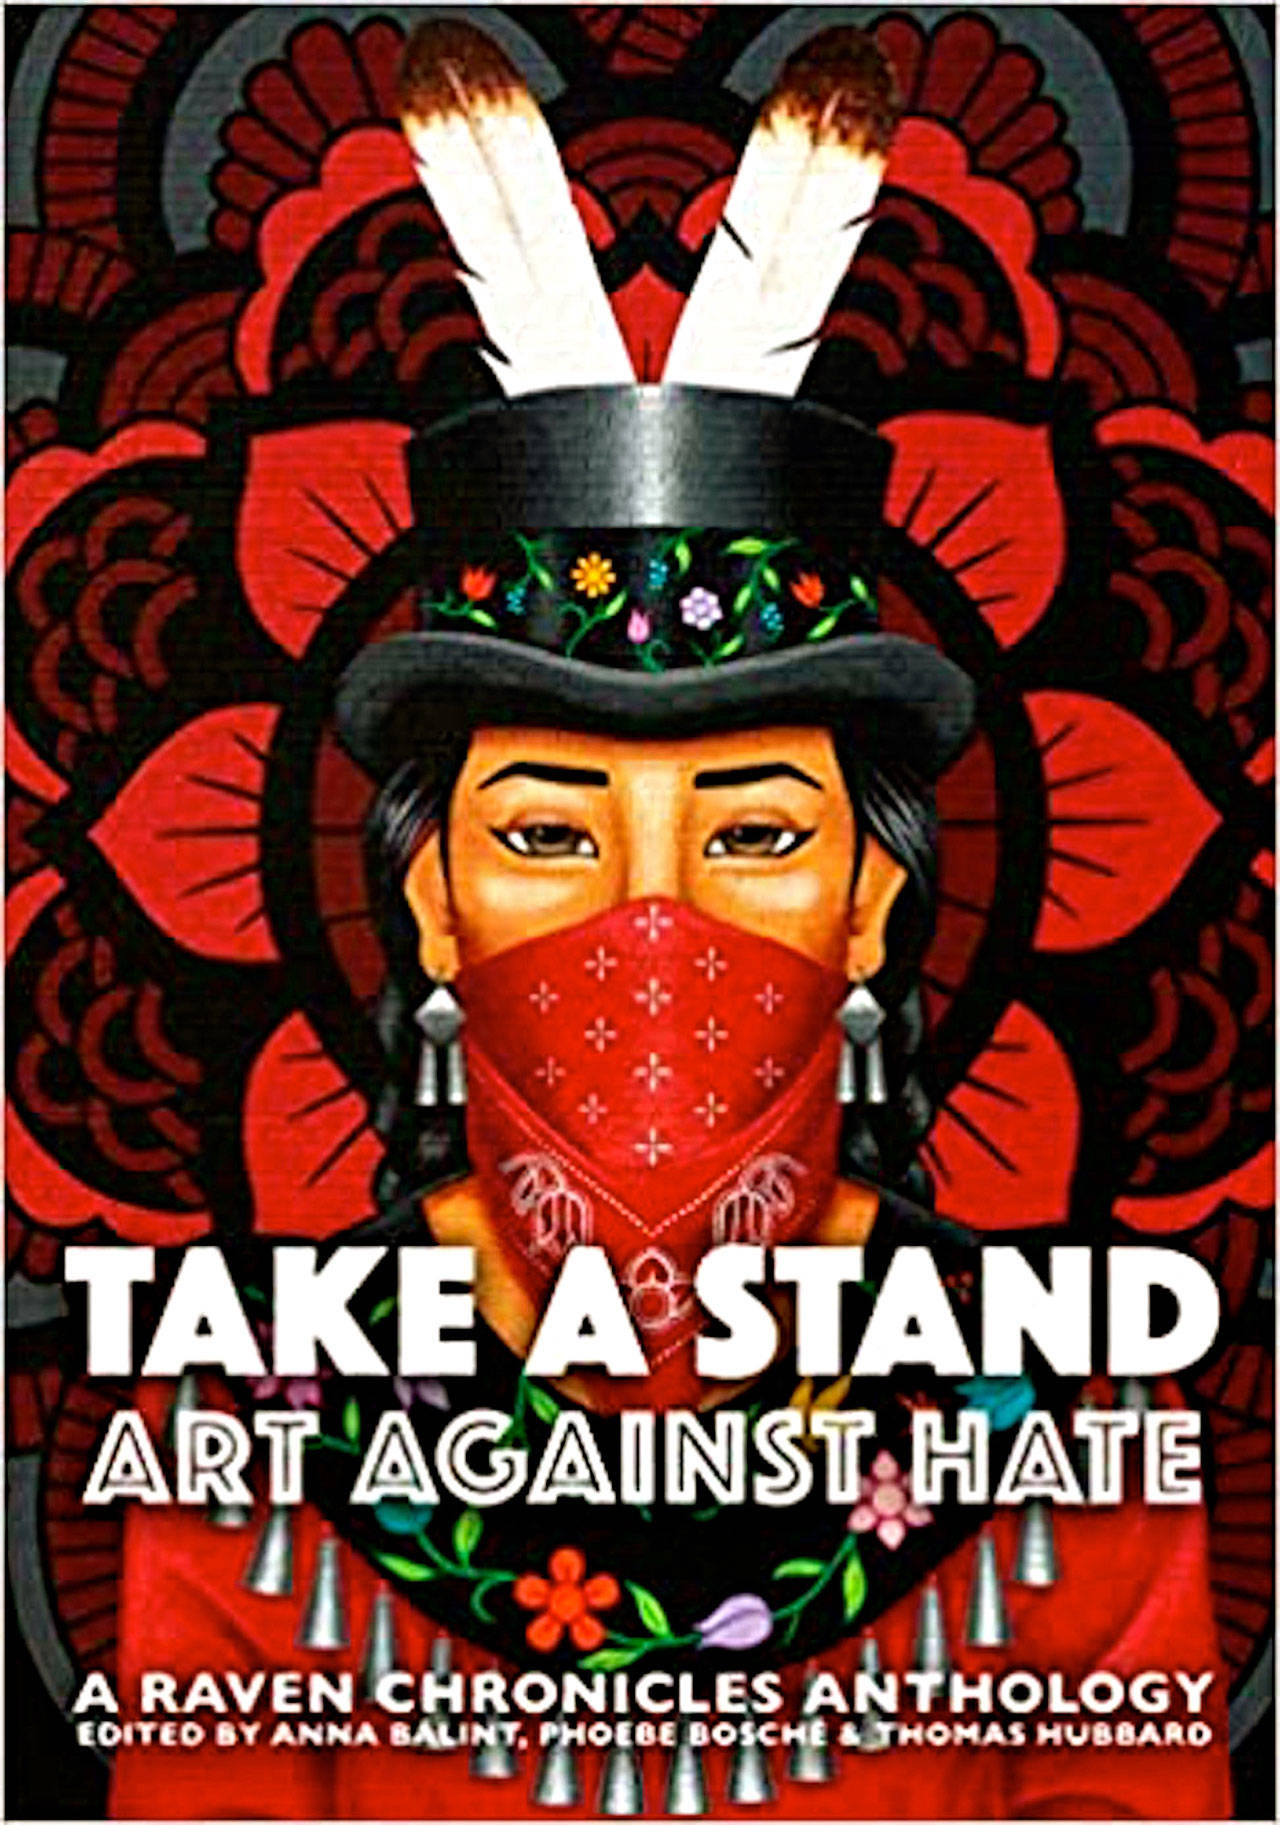 Contributors to “Take a Stand: Art Against Hate” will give a free online reading Thursday.Contributors to “Take a Stand: Art Against Hate” will give a free online reading Thursday, Oct. 8.